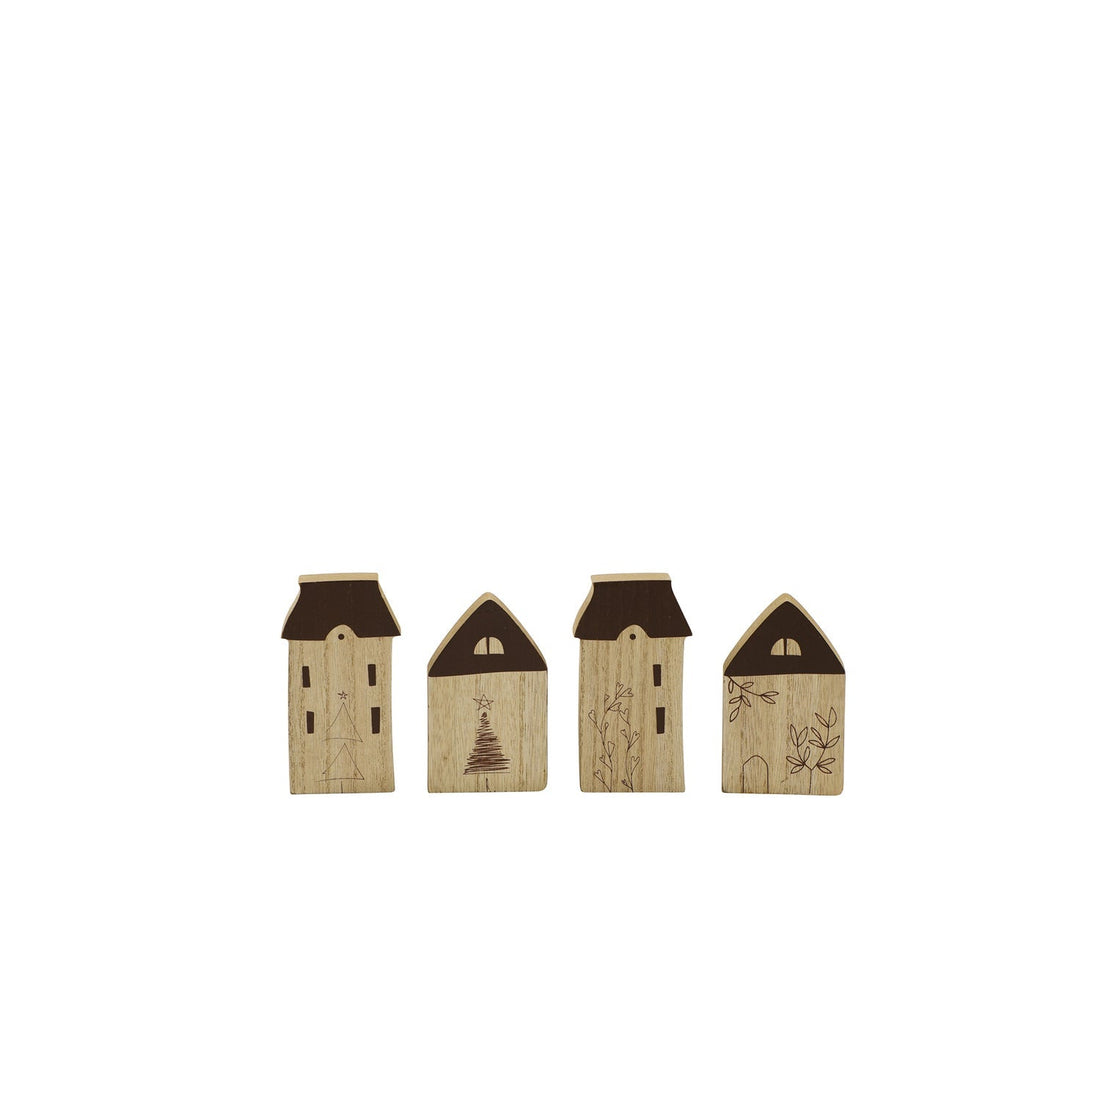 Standing Wooden Houses - The Flower Crate